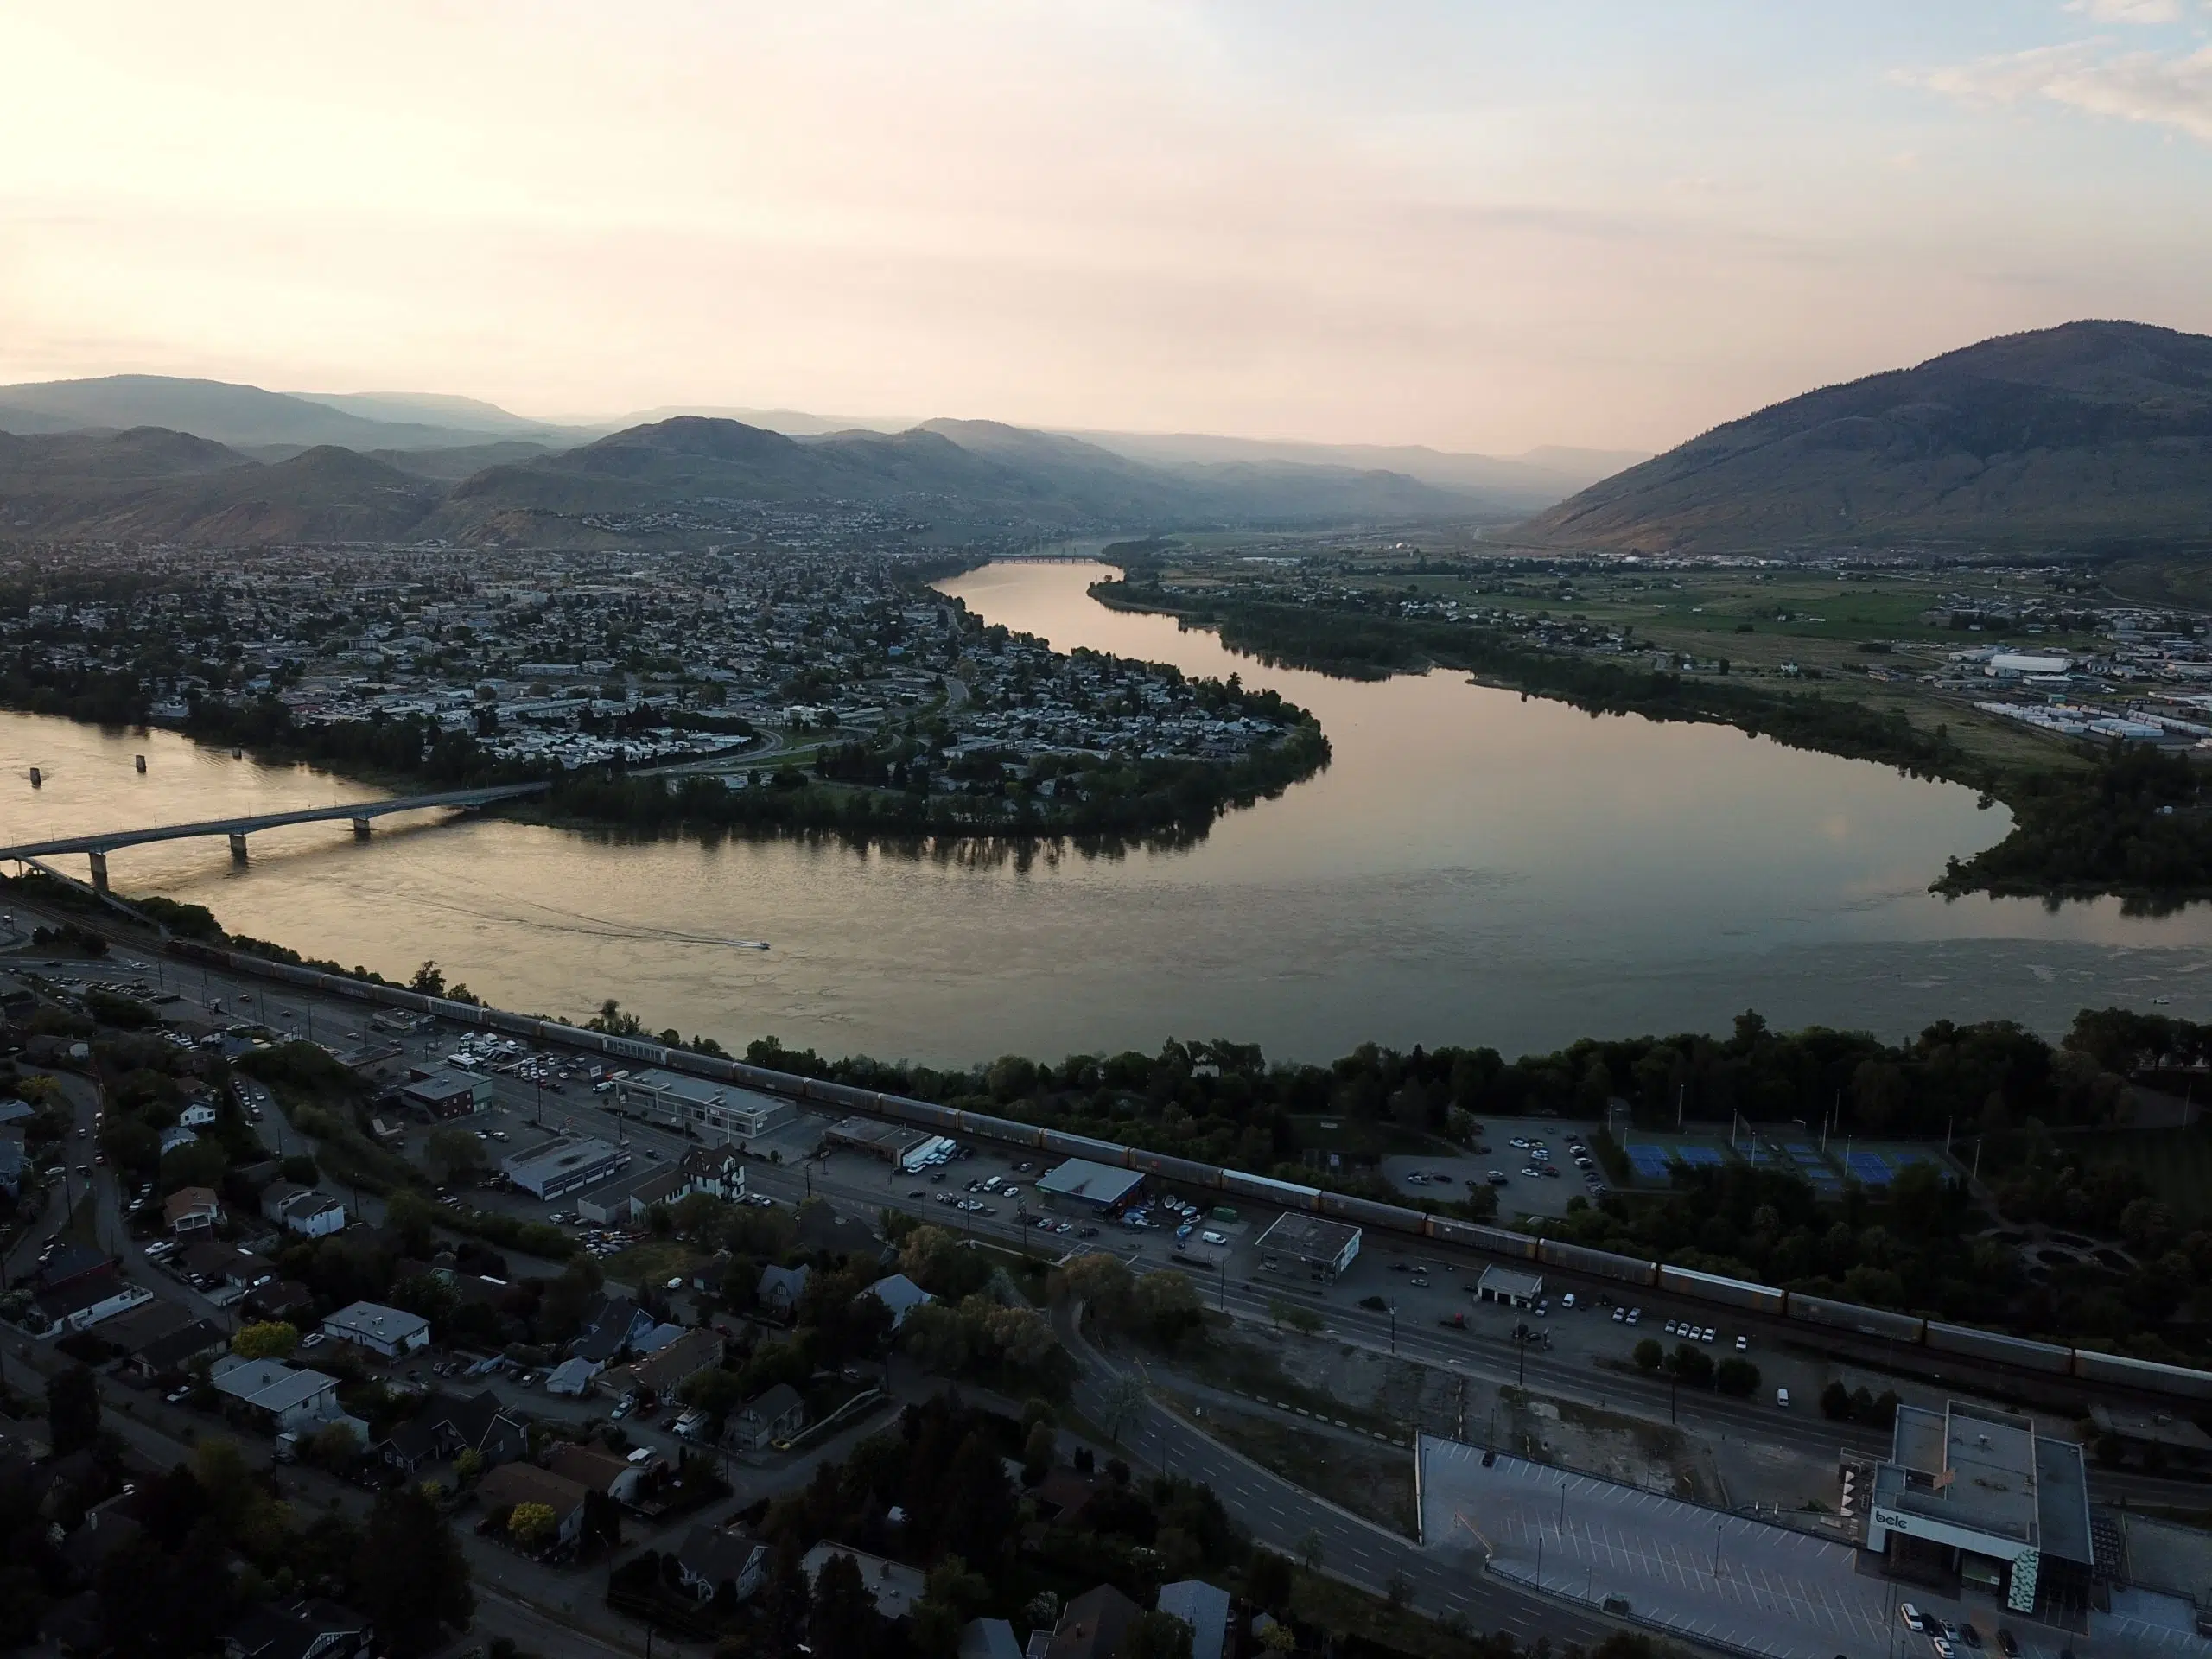 City of Kamloops Still Looking at Another Bridge Crossing the Thompson River